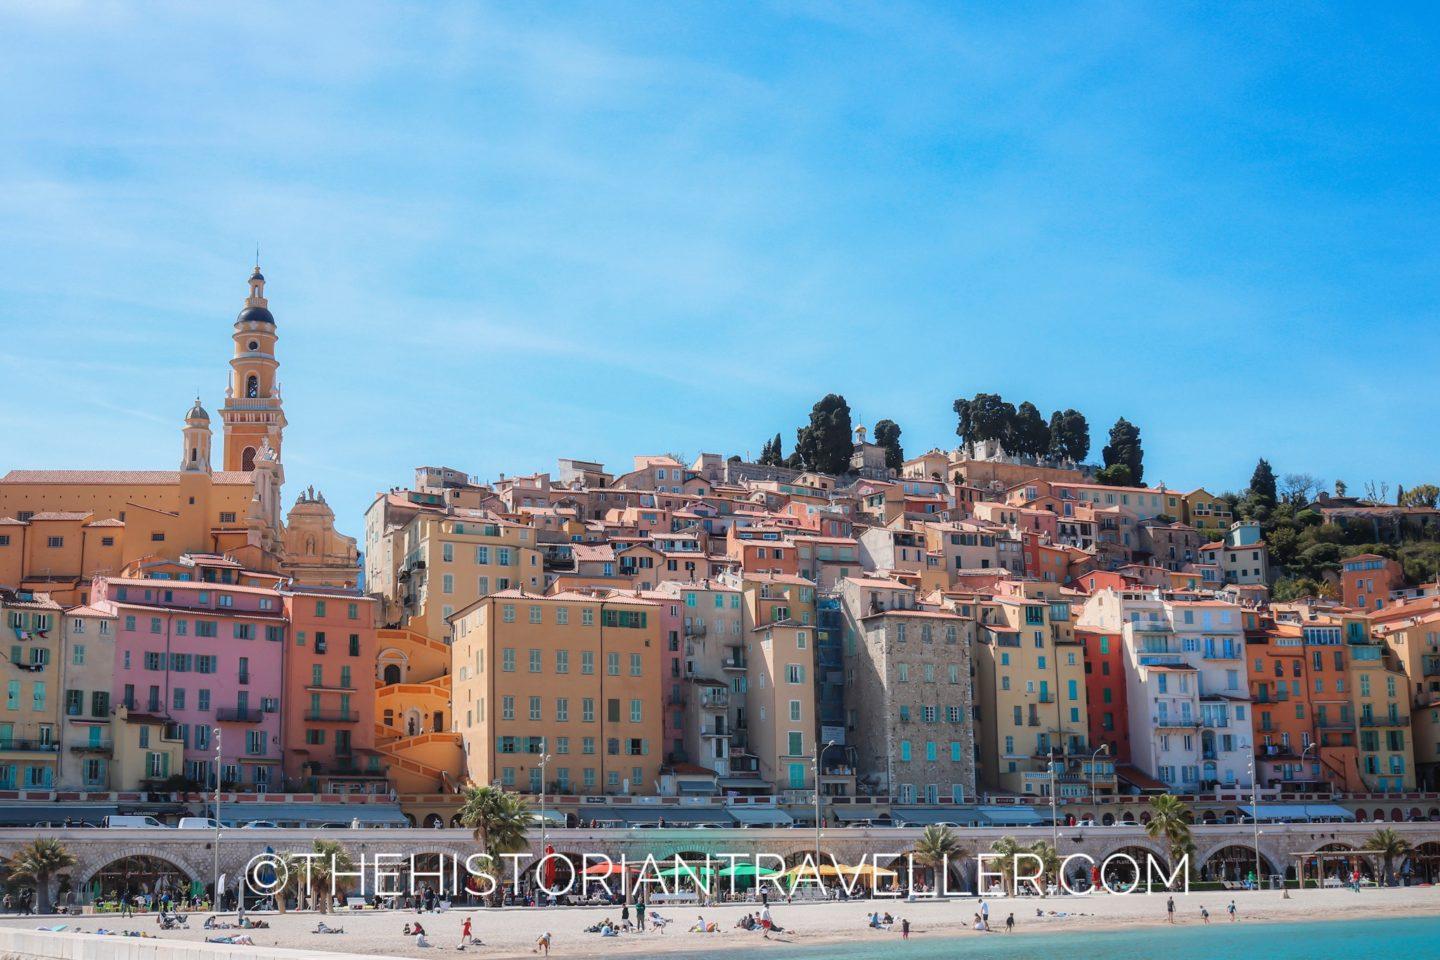 View of Menton from the historical harbour